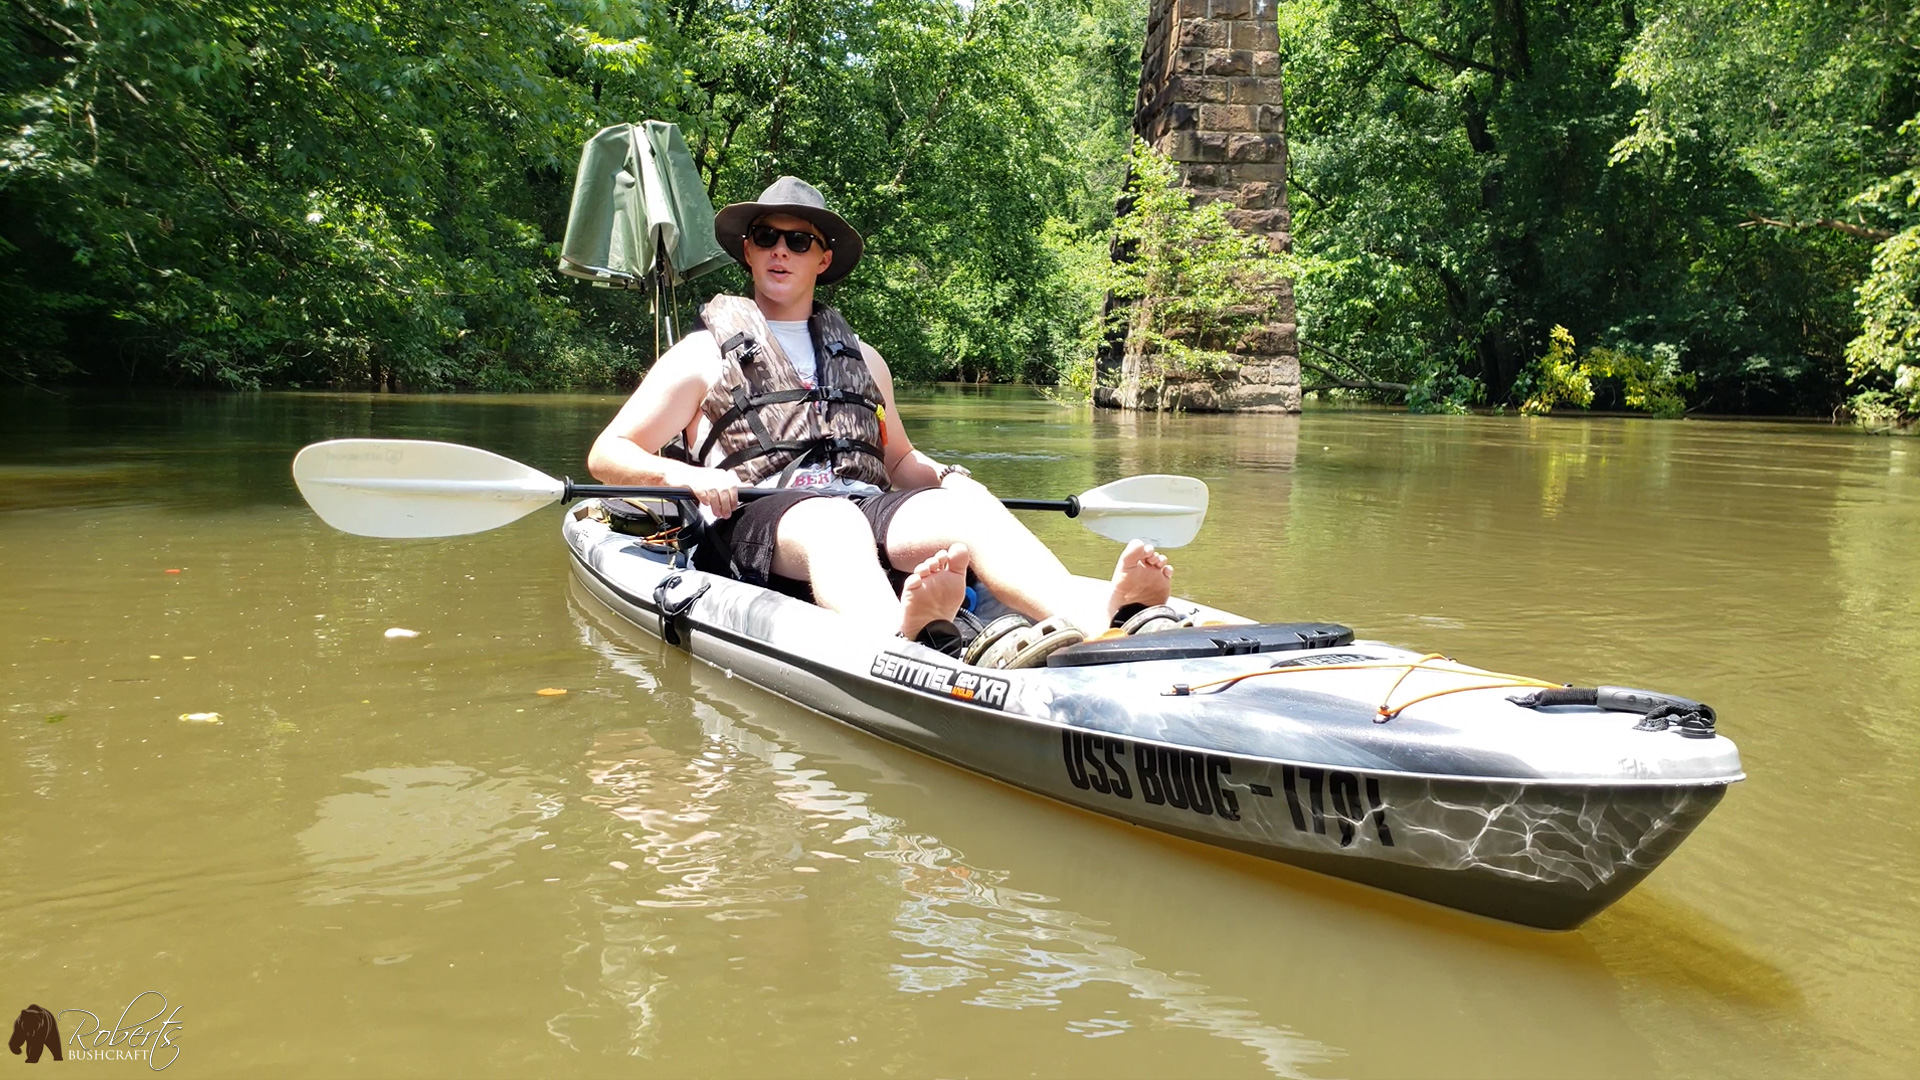 Kayak overnight camping on the Roanoke River